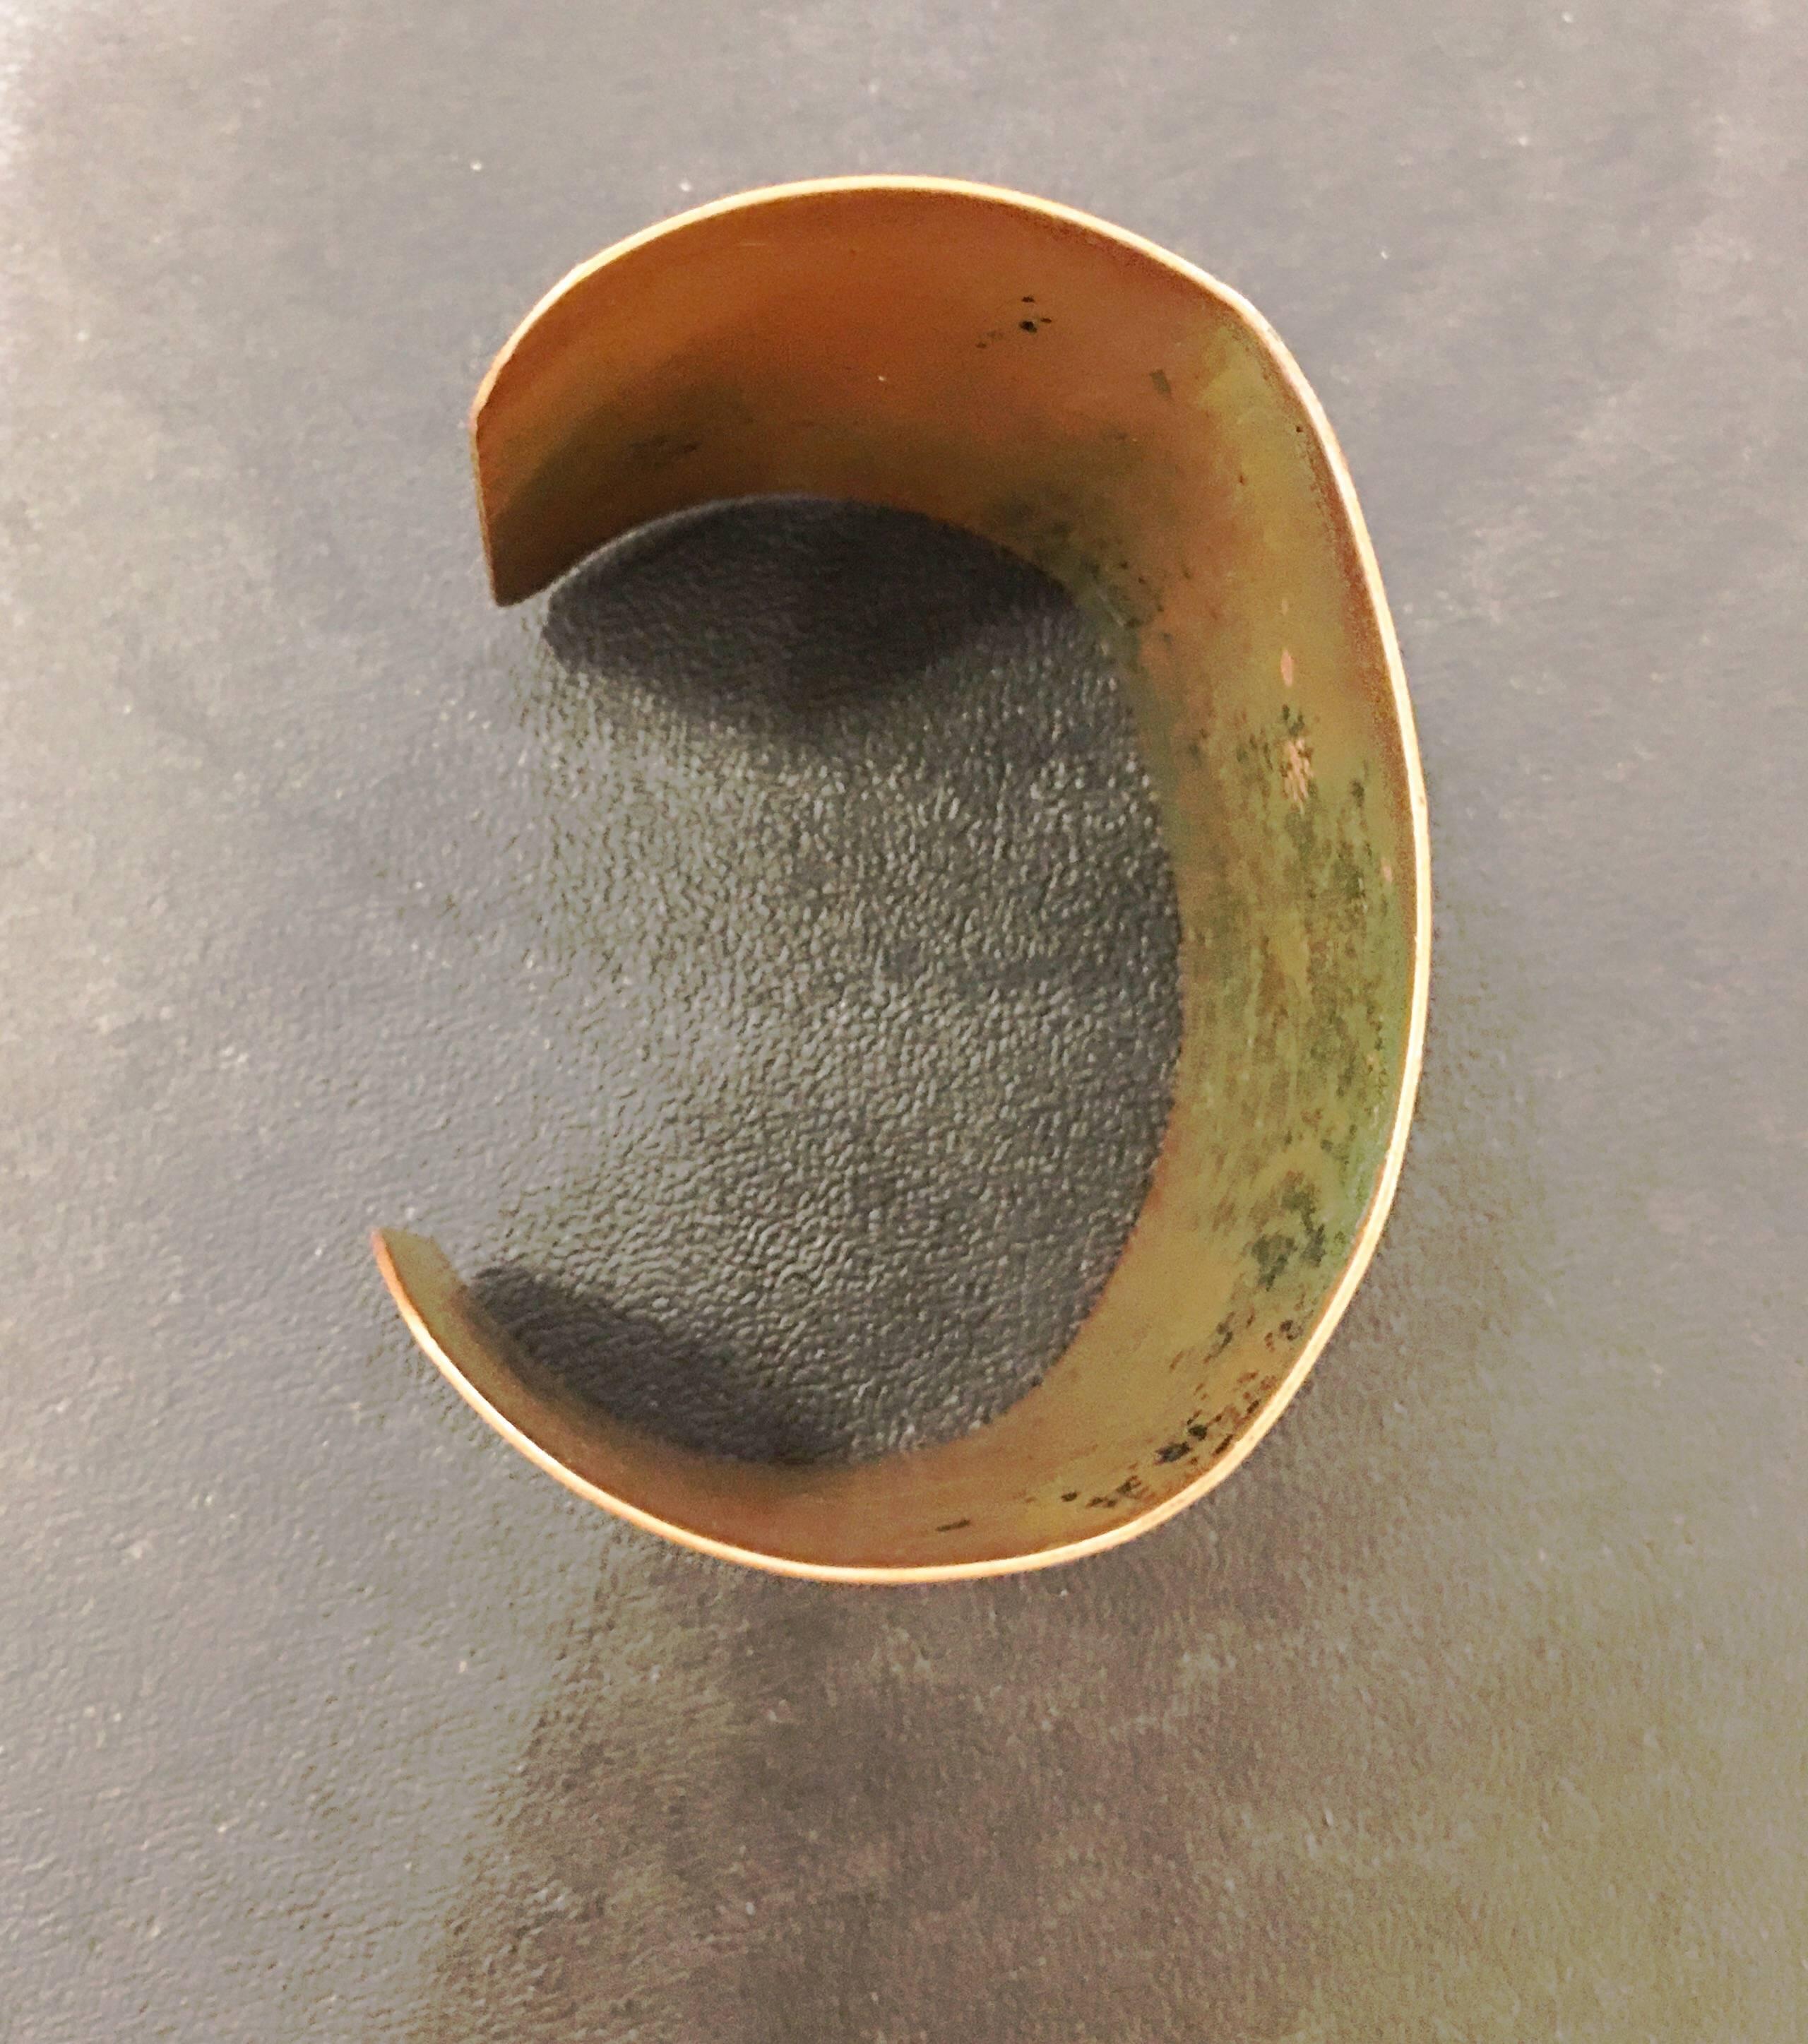 Imprinted copper cuff bracelet with leaf/floral designs around the edges, stripes down the middle. Some sides of aging on the inside of the cuff and some very minor oxidation on the outside in some of the ridges of the stripes. Some